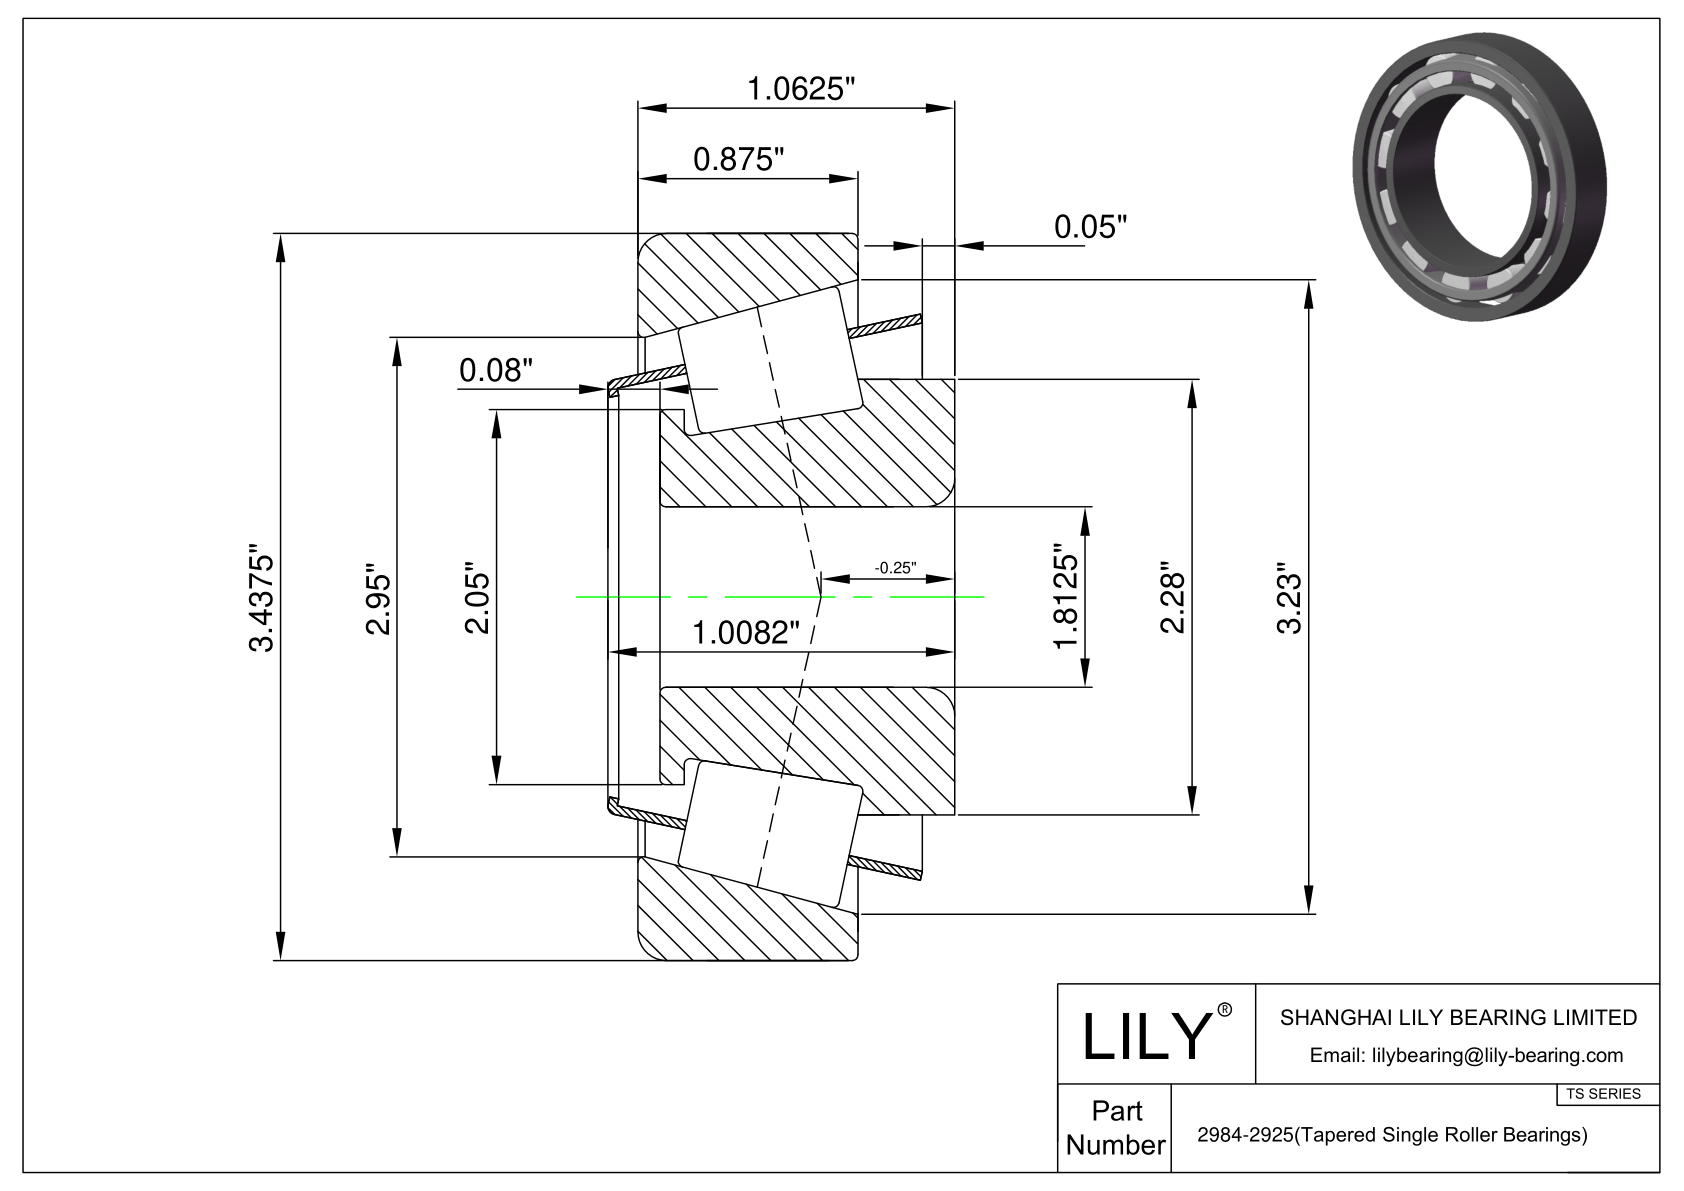 2984-2925 TS (Tapered Single Roller Bearings) (Imperial) cad drawing